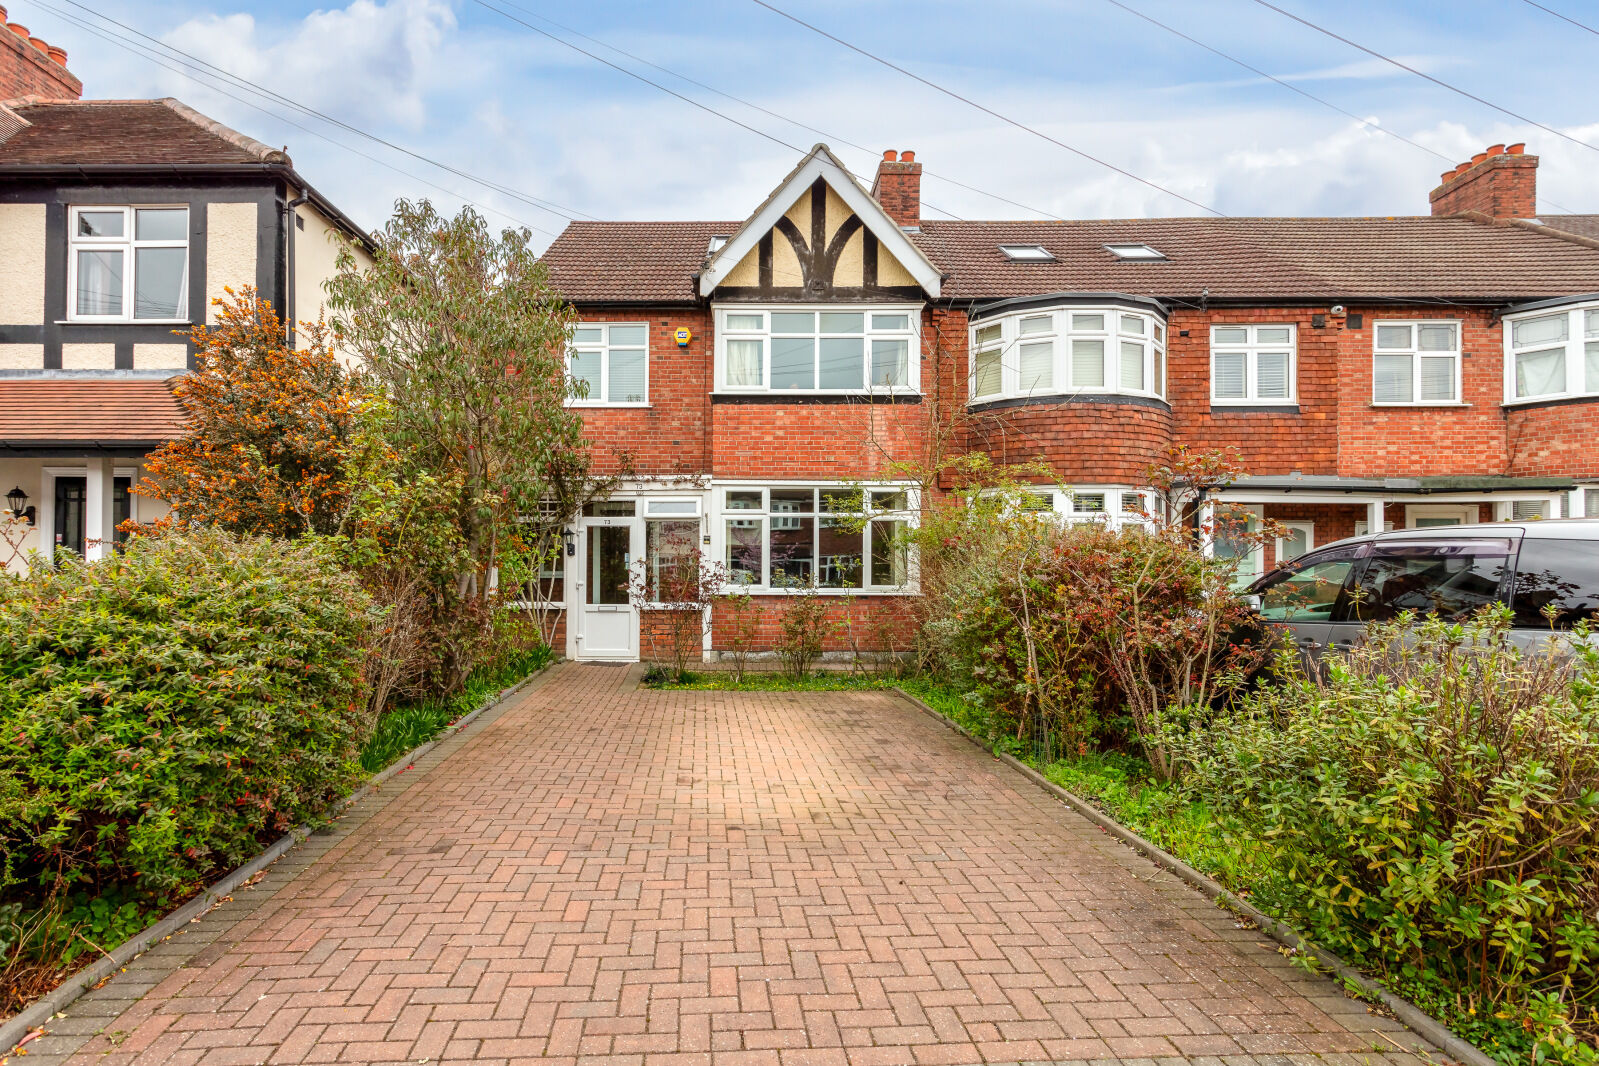 6 bedroom end terraced house for sale Springfield Avenue, London, SW20, main image